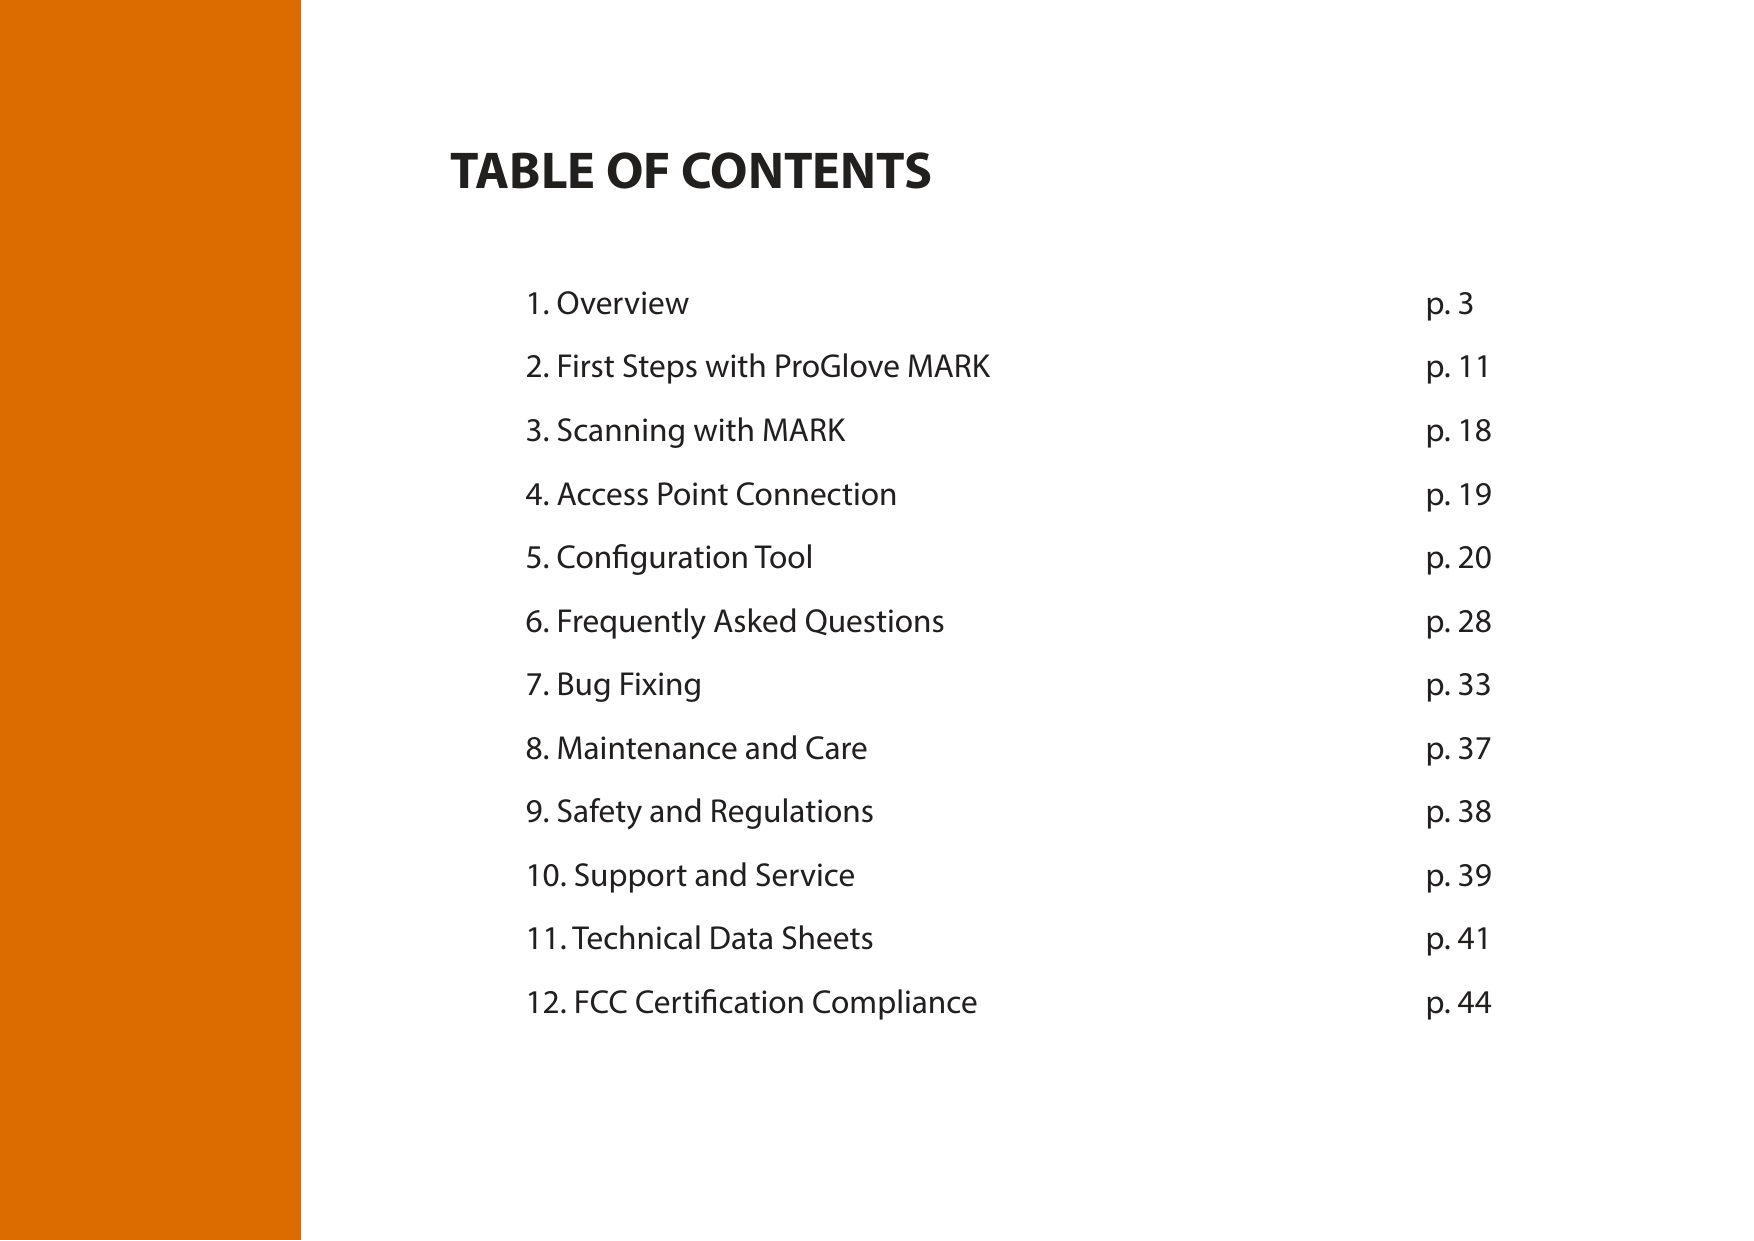 TABLE OF CONTENTS1. Overview           p. 32. First Steps with ProGlove MARK            p. 113. Scanning with MARK        p. 184. Access Point Connection        p. 195. Conguration Tool         p. 206. Frequently Asked Questions       p. 287. Bug Fixing          p. 338. Maintenance and Care        p. 379. Safety and Regulations        p. 3810. Support and Service        p. 3911. Technical Data Sheets        p. 4112. FCC Certication Compliance      p. 44